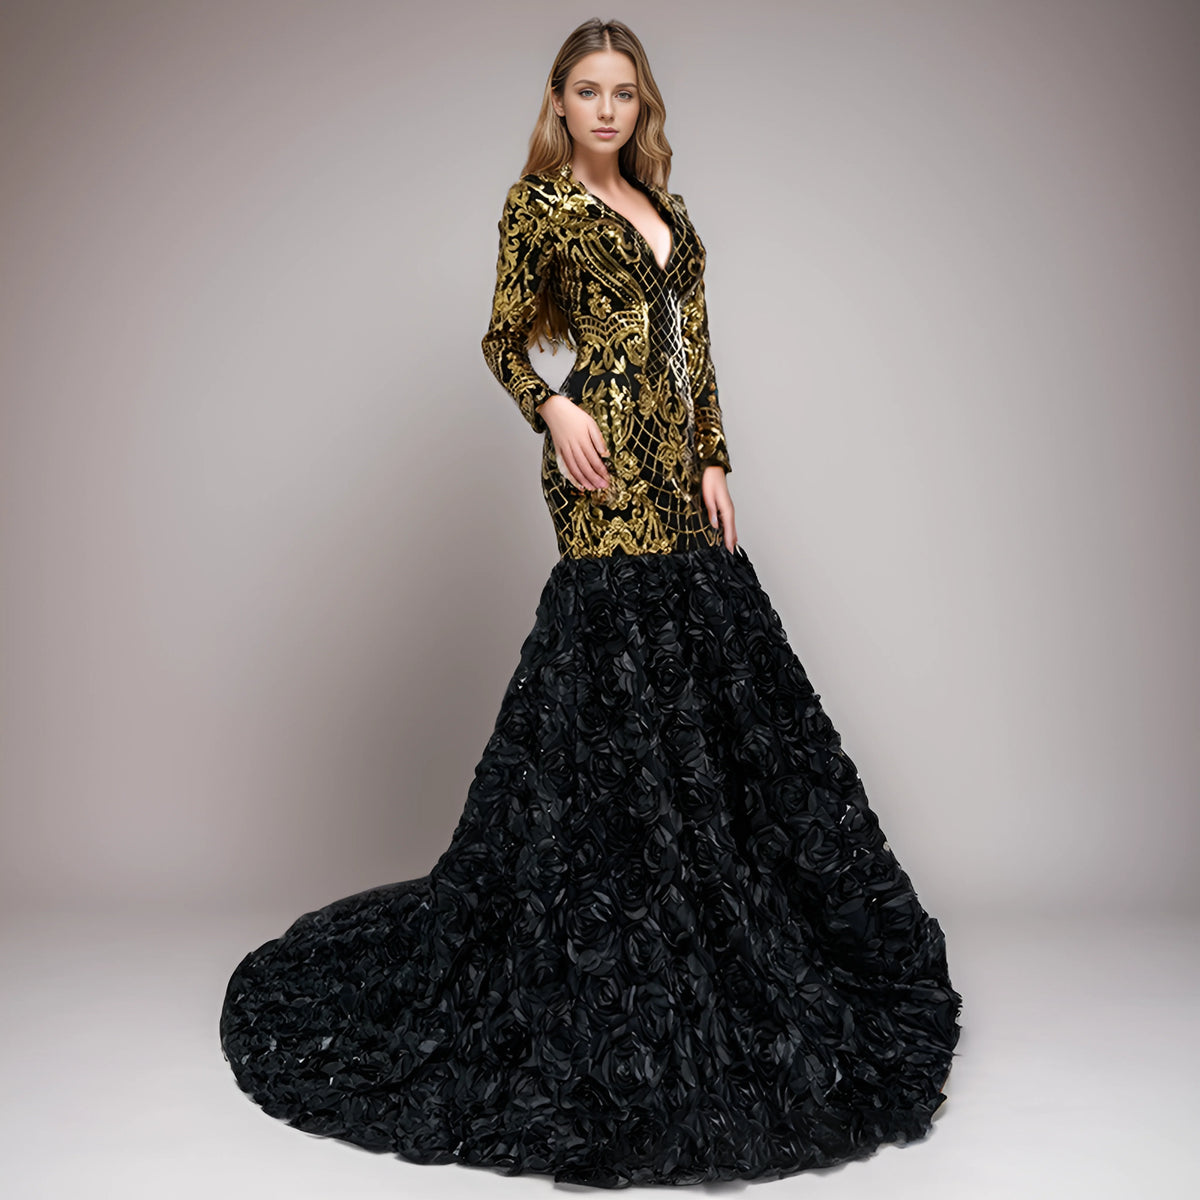 Luxury Black V-Neck Mermaid Evening Gown with 3D Lace, Sequins, and Long Sleeves for Women - Perfect for Special Occasions